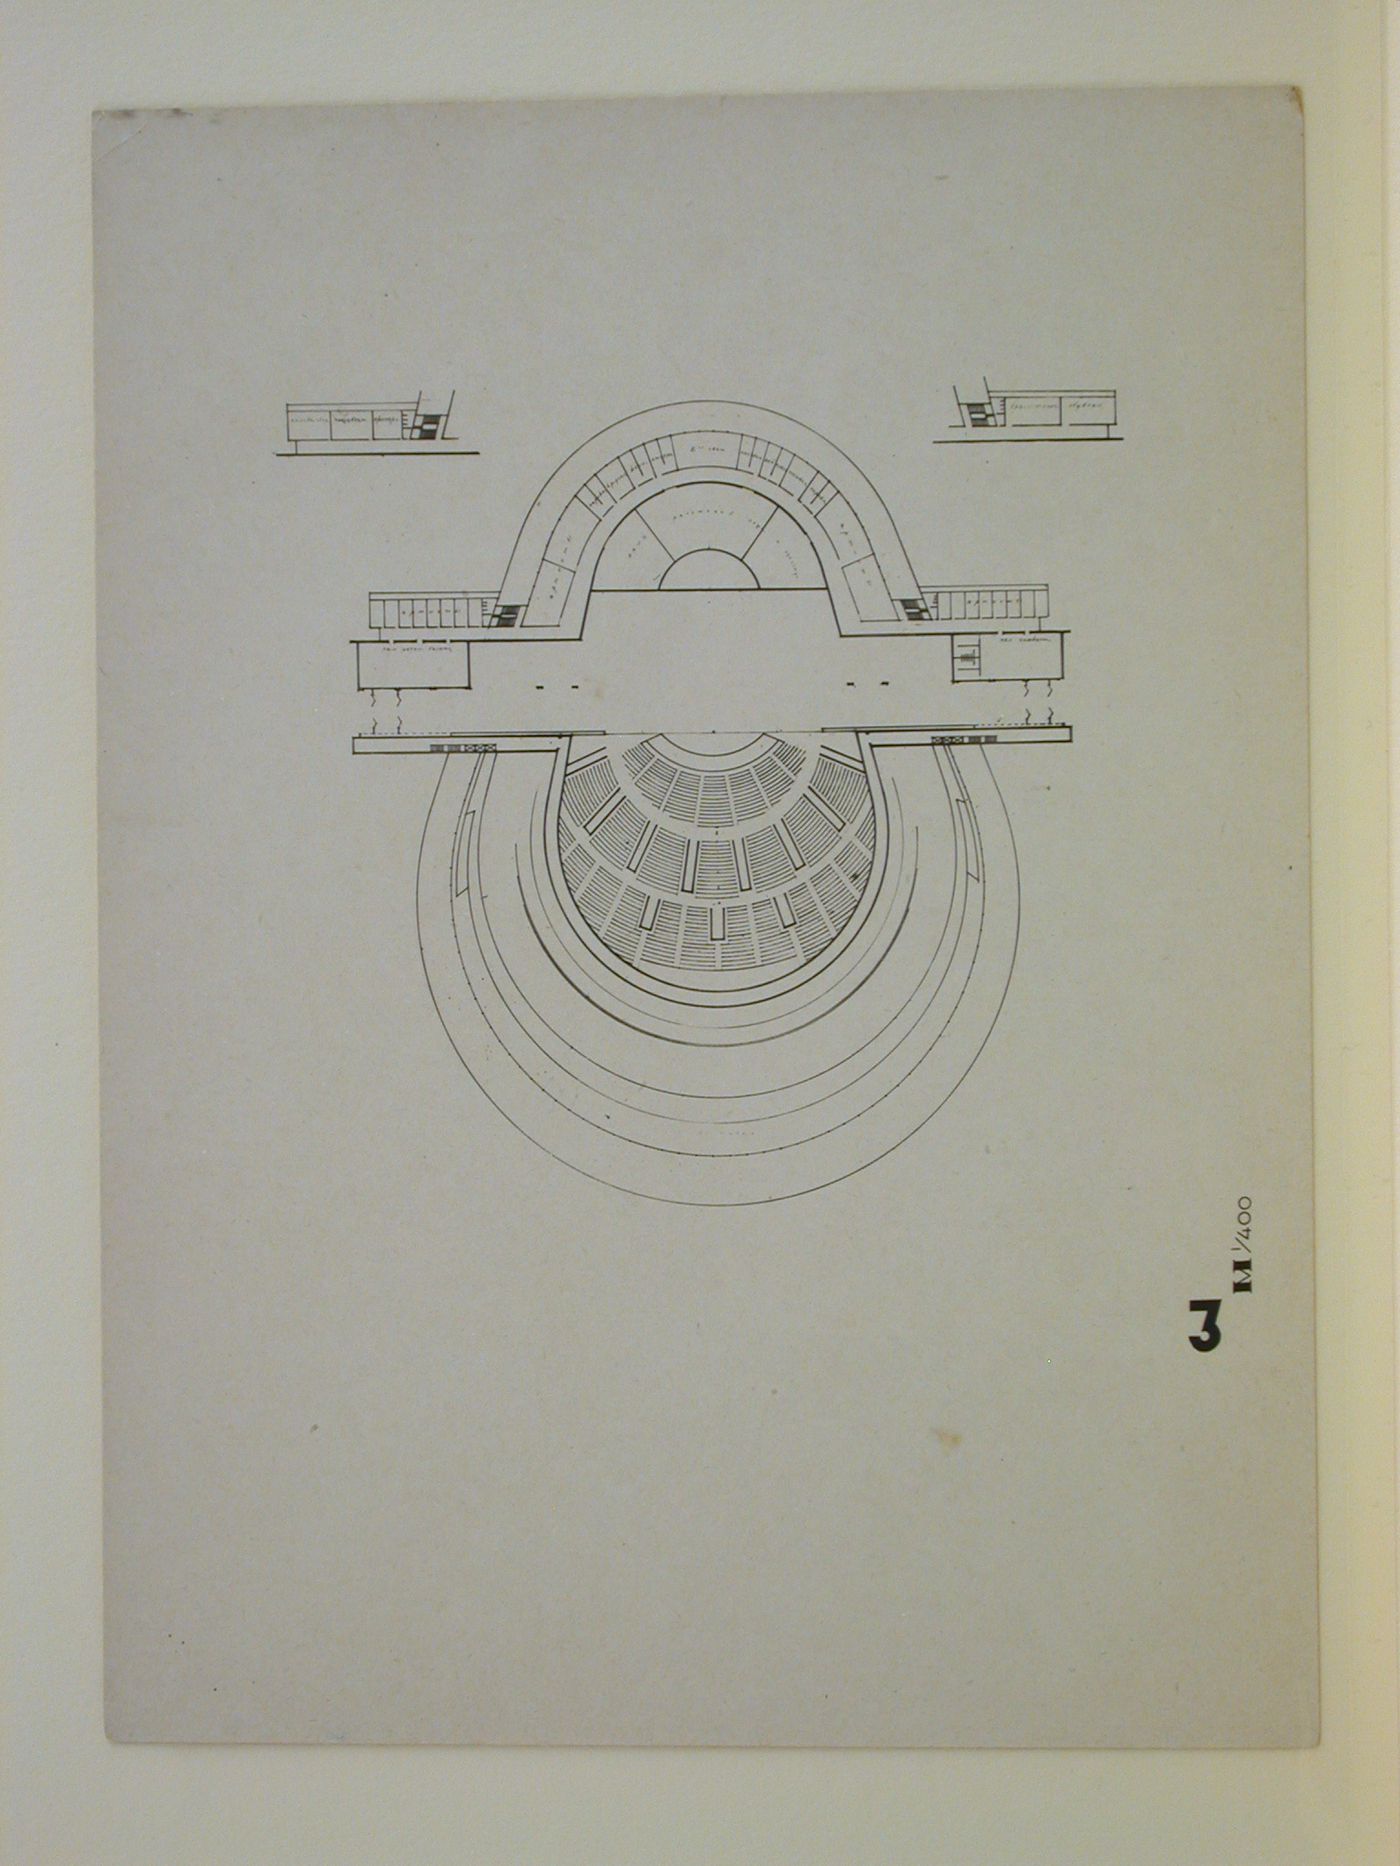 Photograph of a plan for the first round of competition for a "synthetic theater" in Sverdlovsk, Soviet Union (now Ekaterinburg, Russia)